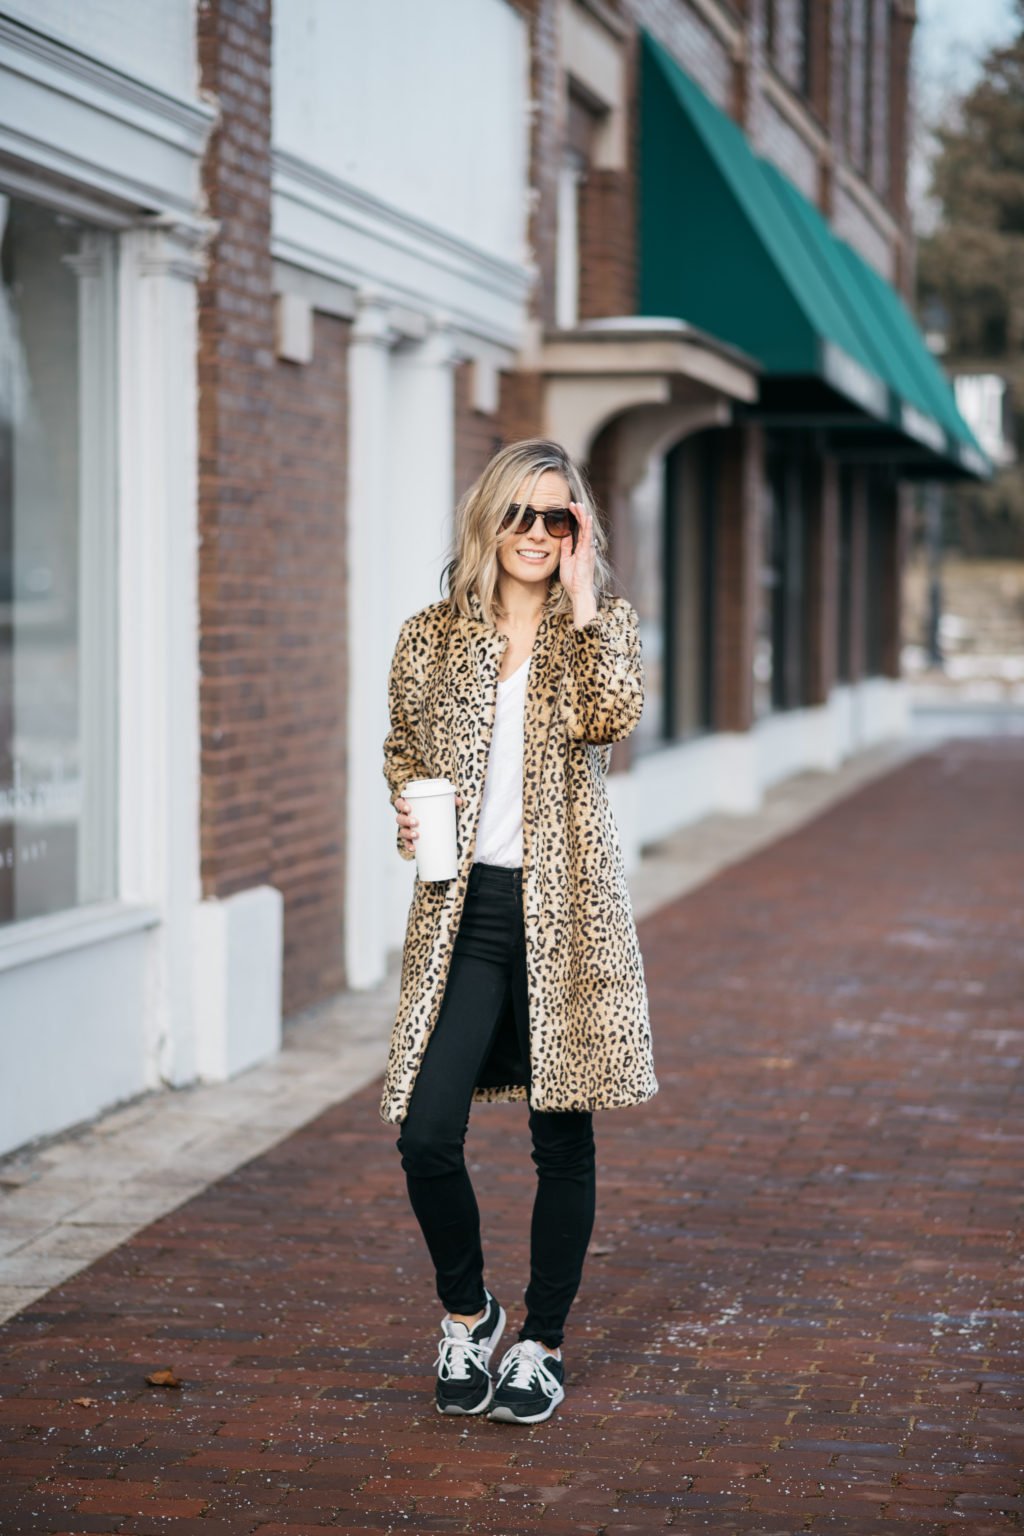 Favorite looks of 2018, leopard coat, skinny jeans and sneakers